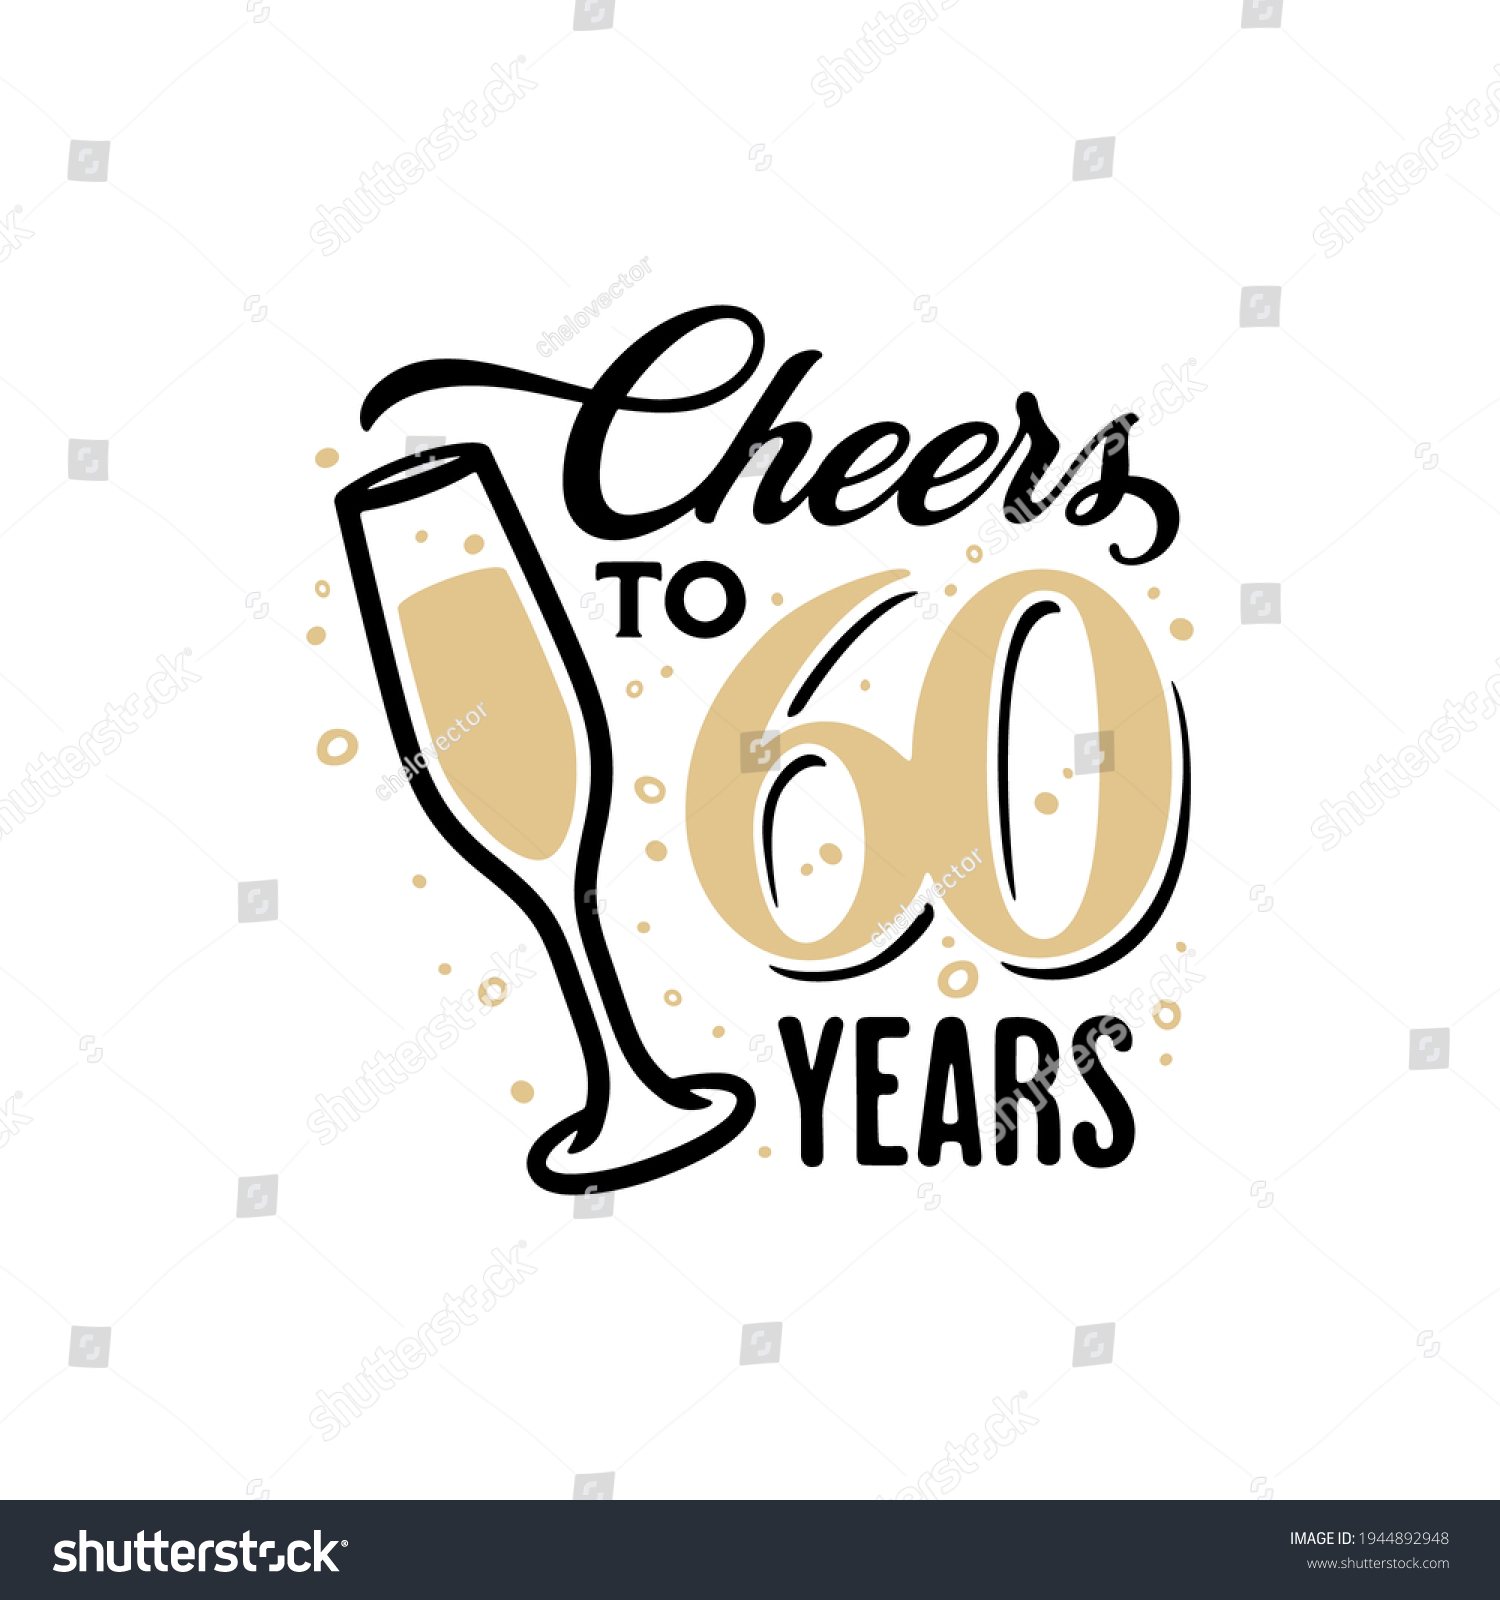 SVG of Cheers to 60 years lettering sign. Glass of champagne with bubbles and golden numbers. Anniversary typography composition. Vector vintage illustration. svg